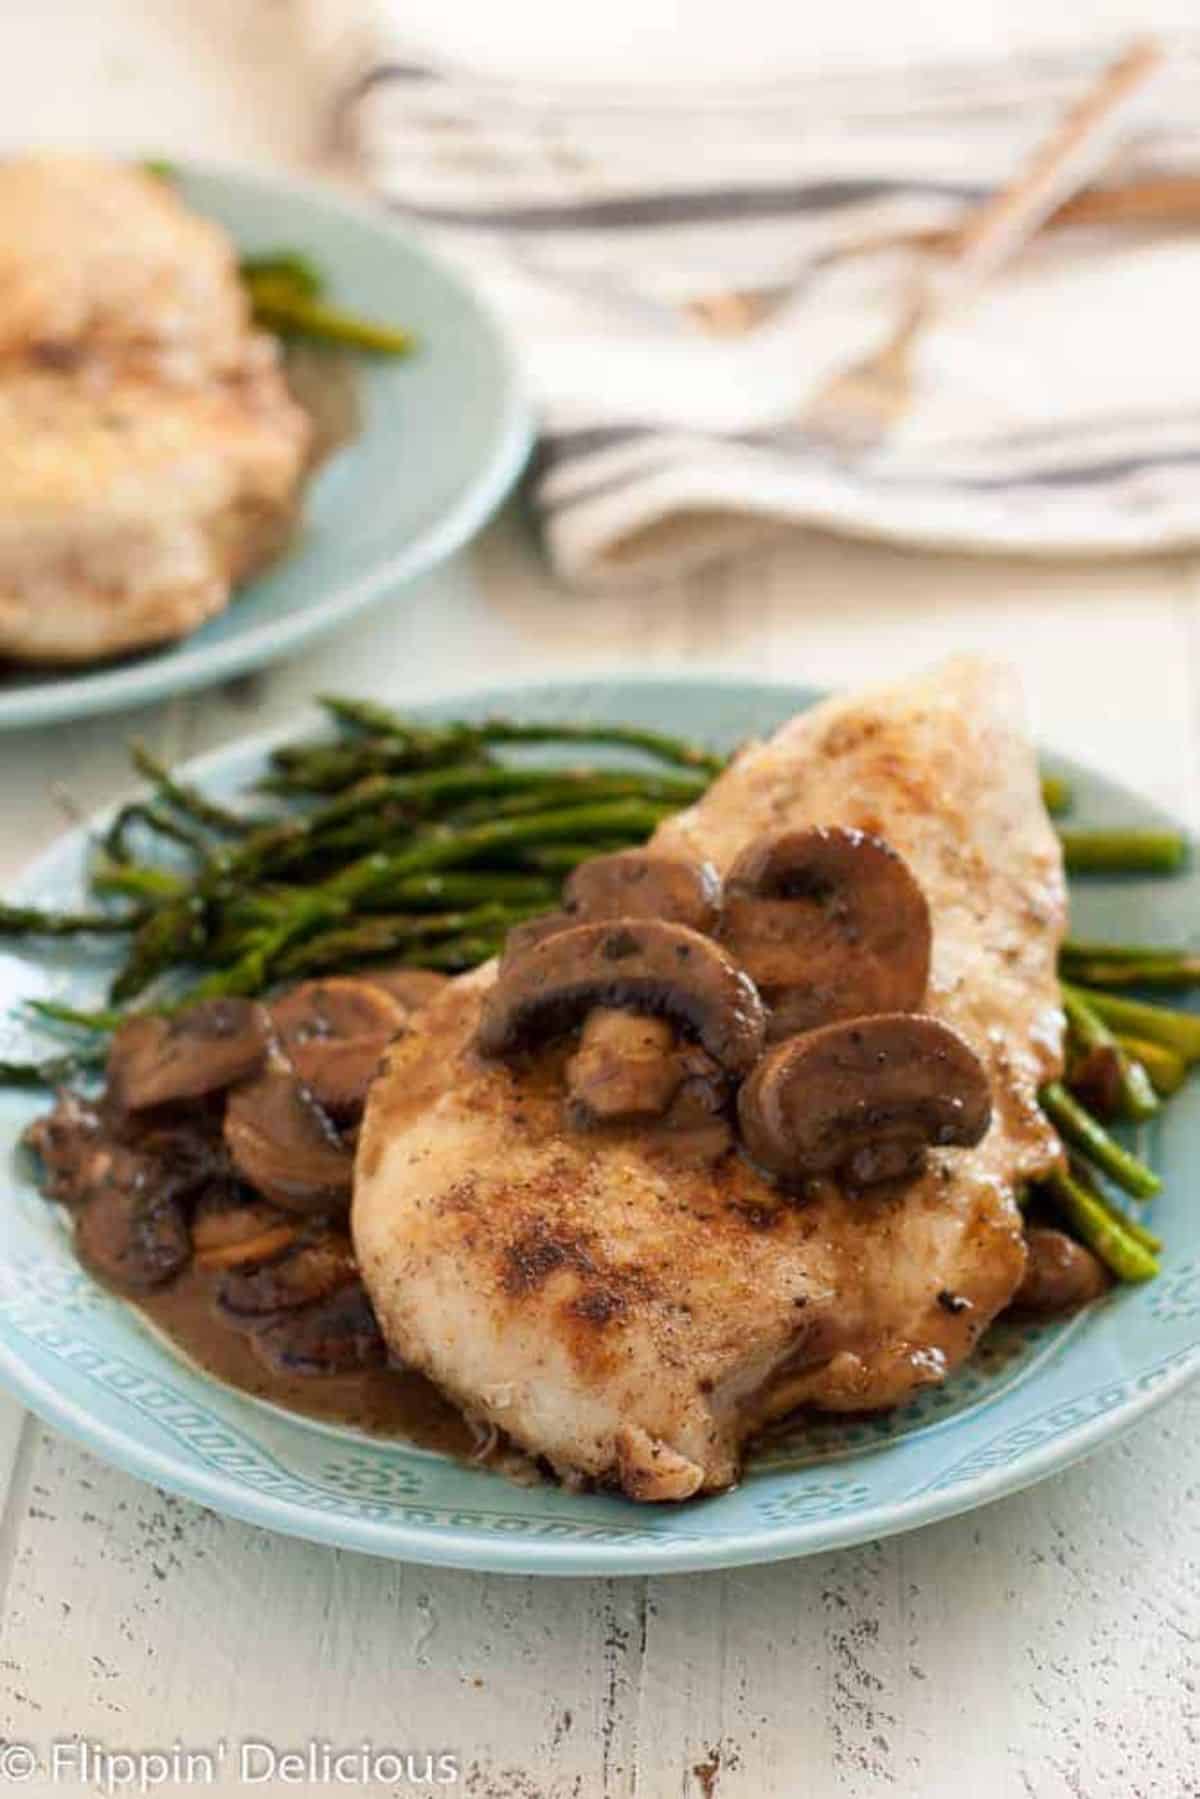 Tasty Gluten-Free Chicken Marsala with Mushrooms and asparagus on a blue plate.